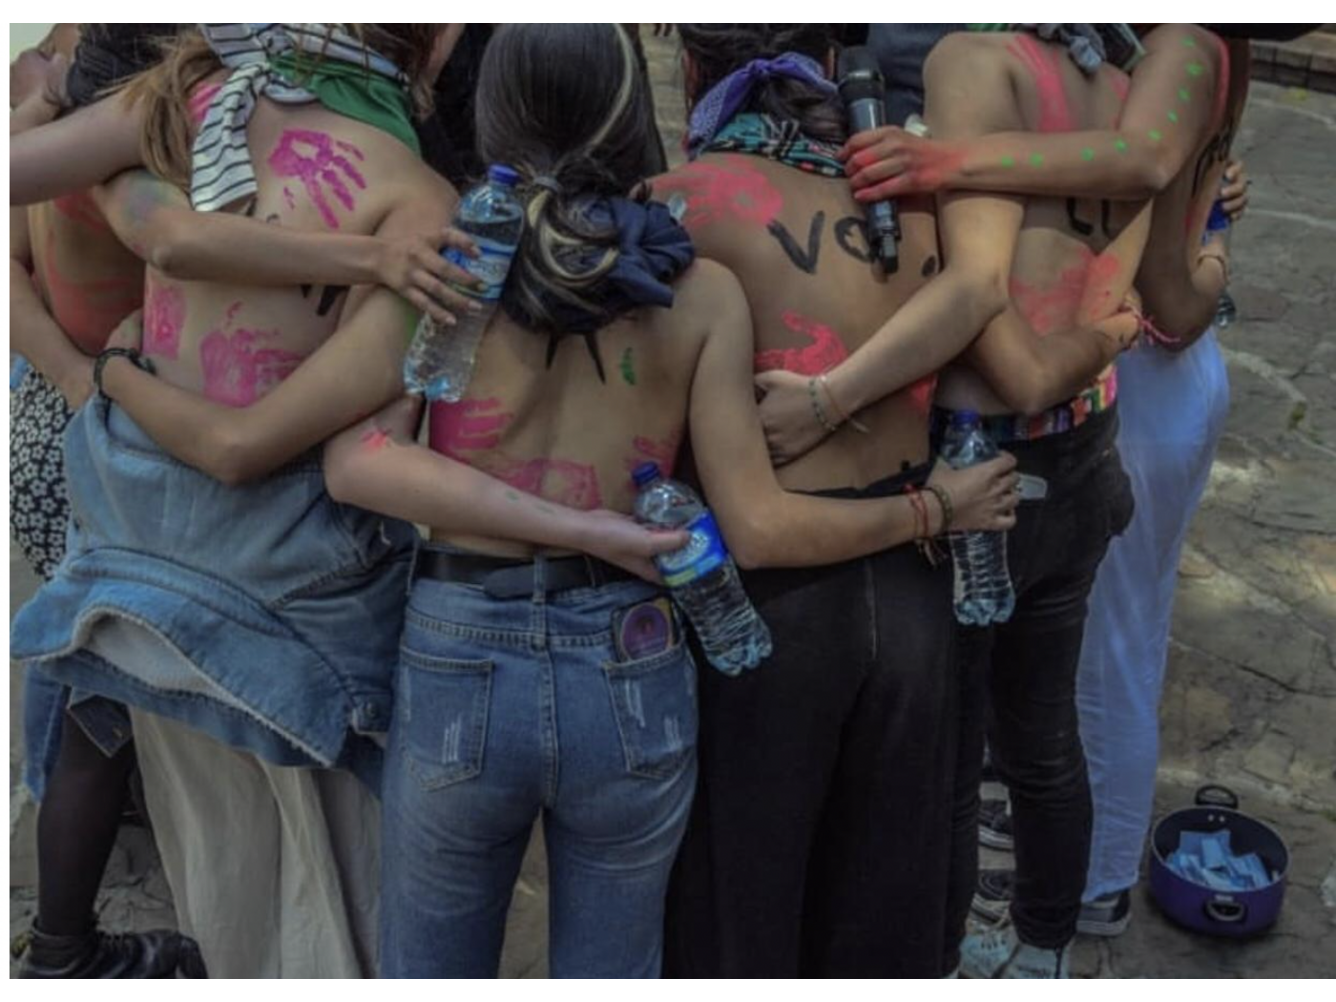 Protesting sexual assault in Colombia